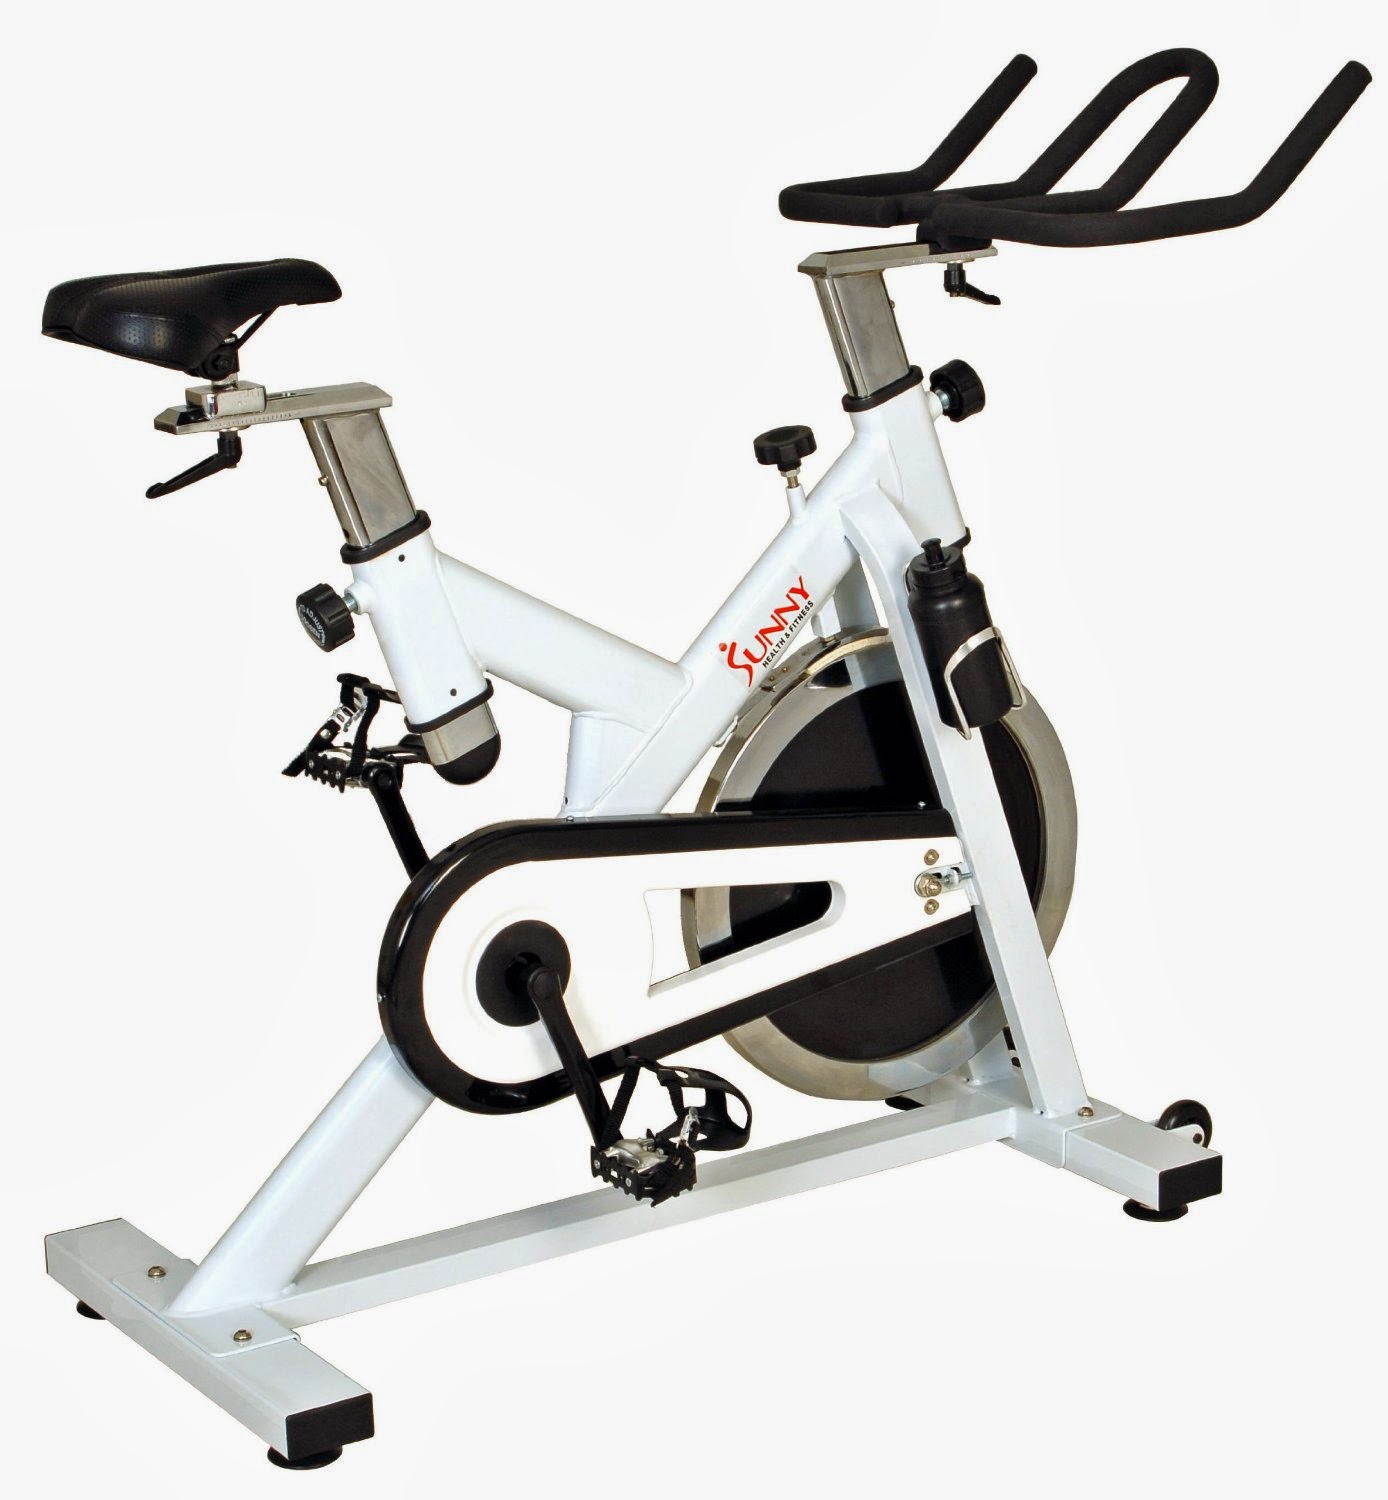 Sunny Health & Fitness SF-B1110 Premier Indoor Cycling Bike, review of features, rivals more expensive spin bikes